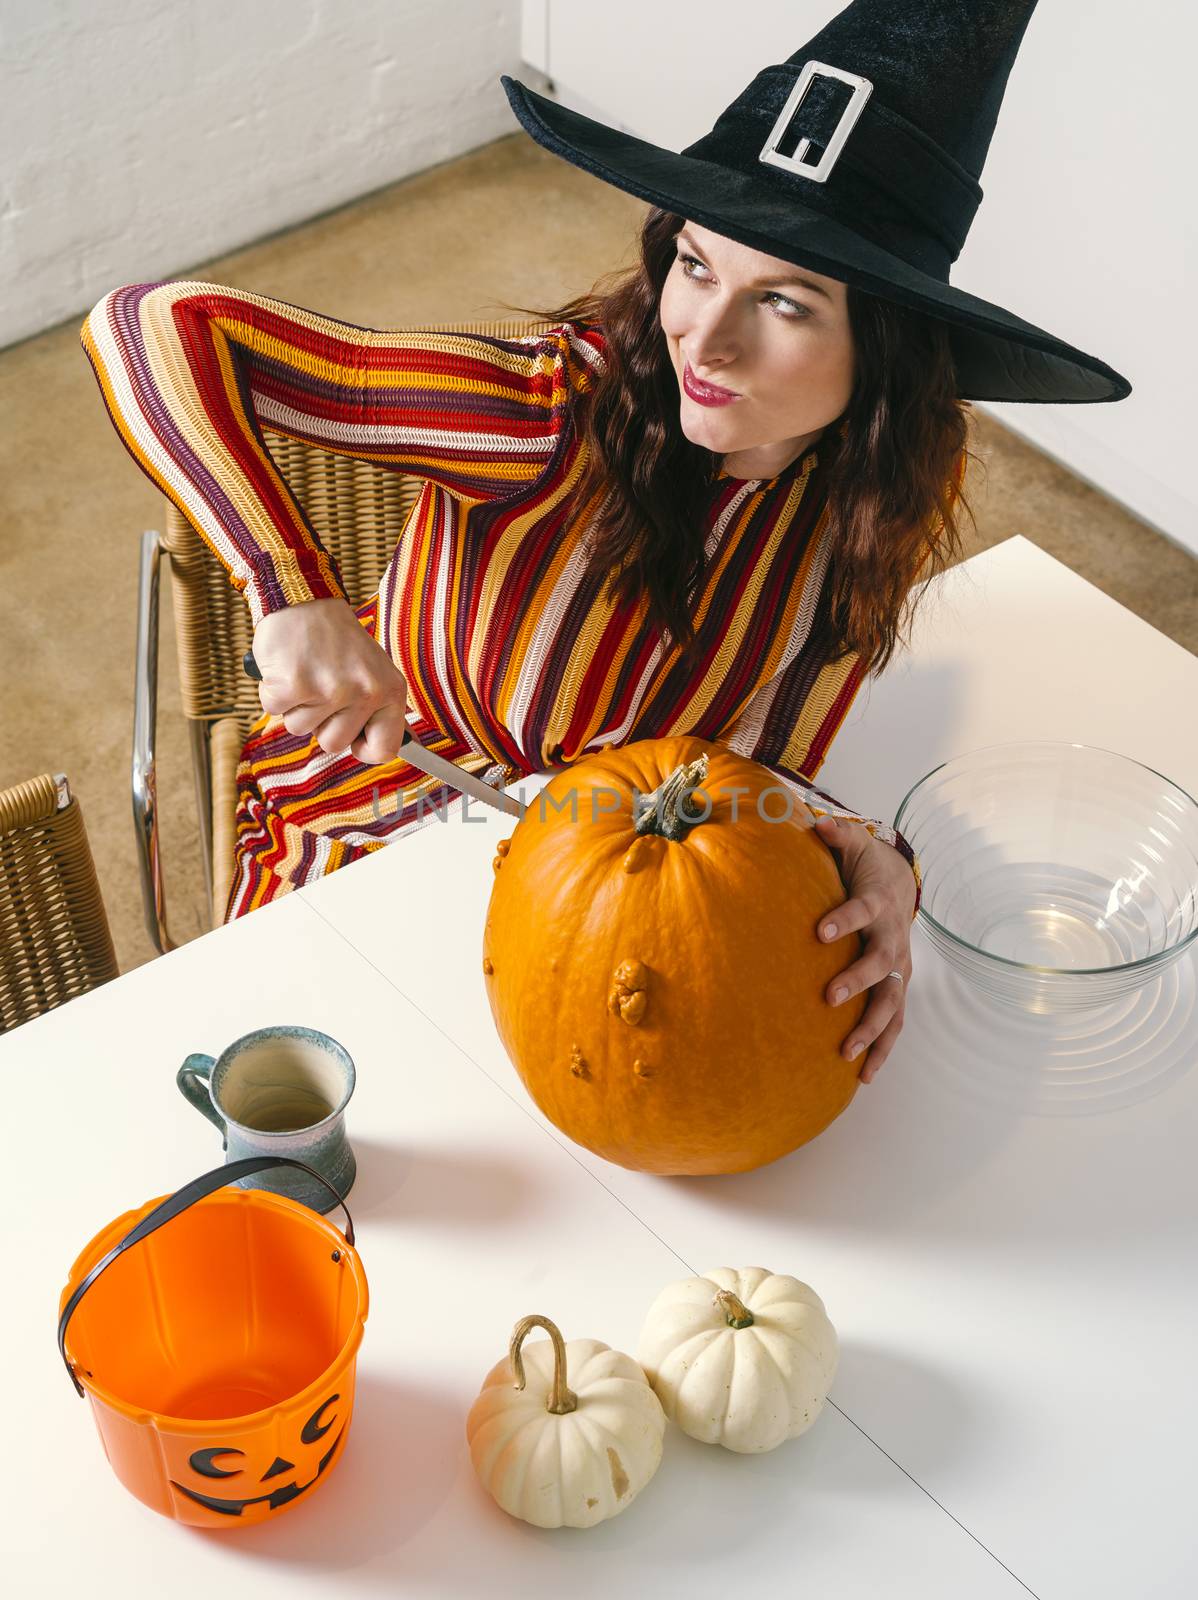 Redhead woman cutting a pumpkin for Halloween by sumners